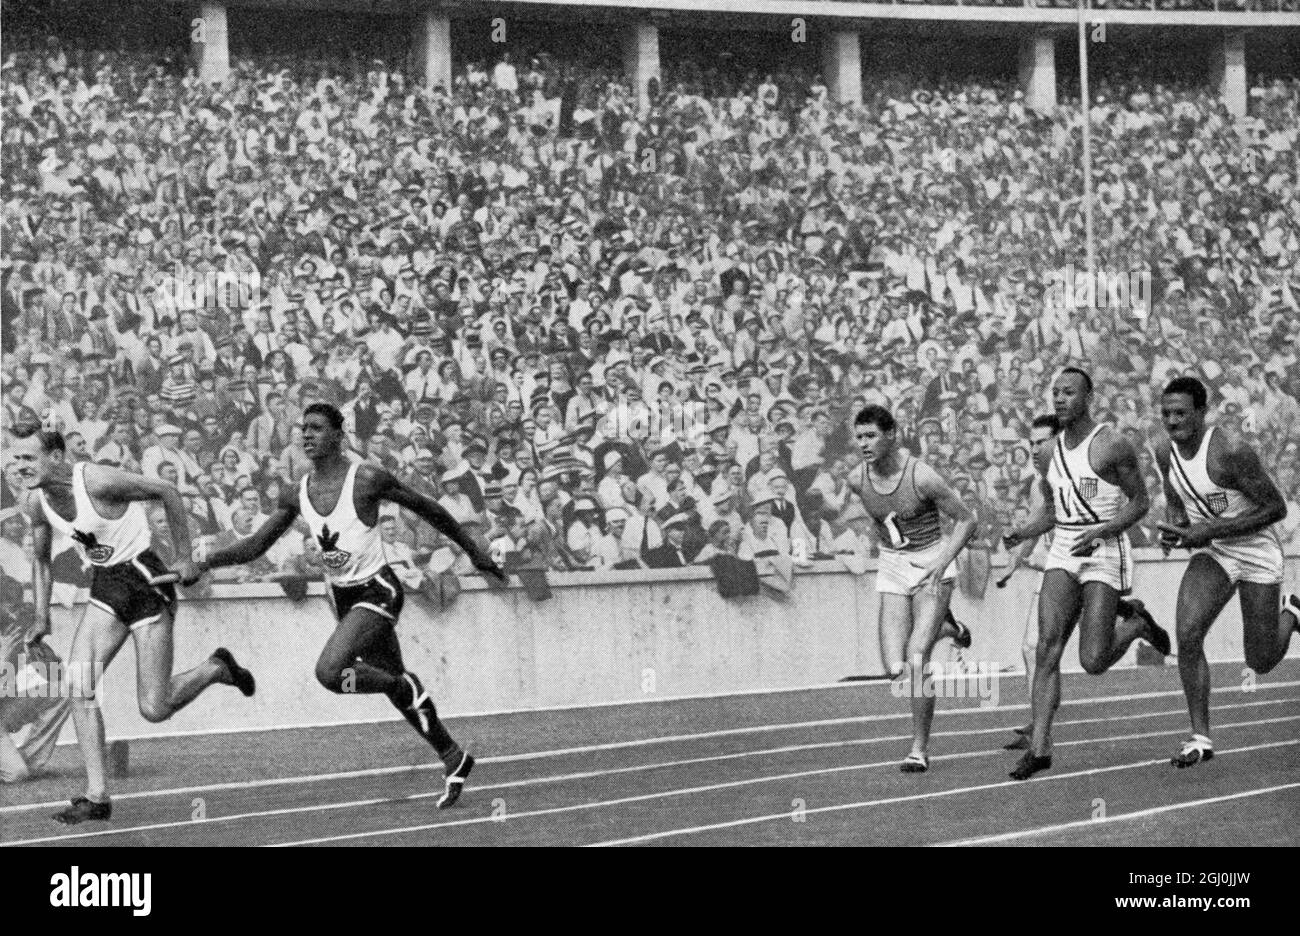 1936 Olympics, Berlin - The first handover of the 4x100-metre relay: Jesse Owens is already in the lead and passes the baton on to Metcalfe. Canada had a curve advantage and here still lies in front. Erster Wechsel der 4x100-metre Staffel: Jesse Owens (vierte Bahn) hat schon Terrain erobert und gibt den Stab an Metcalfe weiter. Canada hatte Kurvenvorgabe und liegt hier noch in Front. ©TopFoto Stock Photo